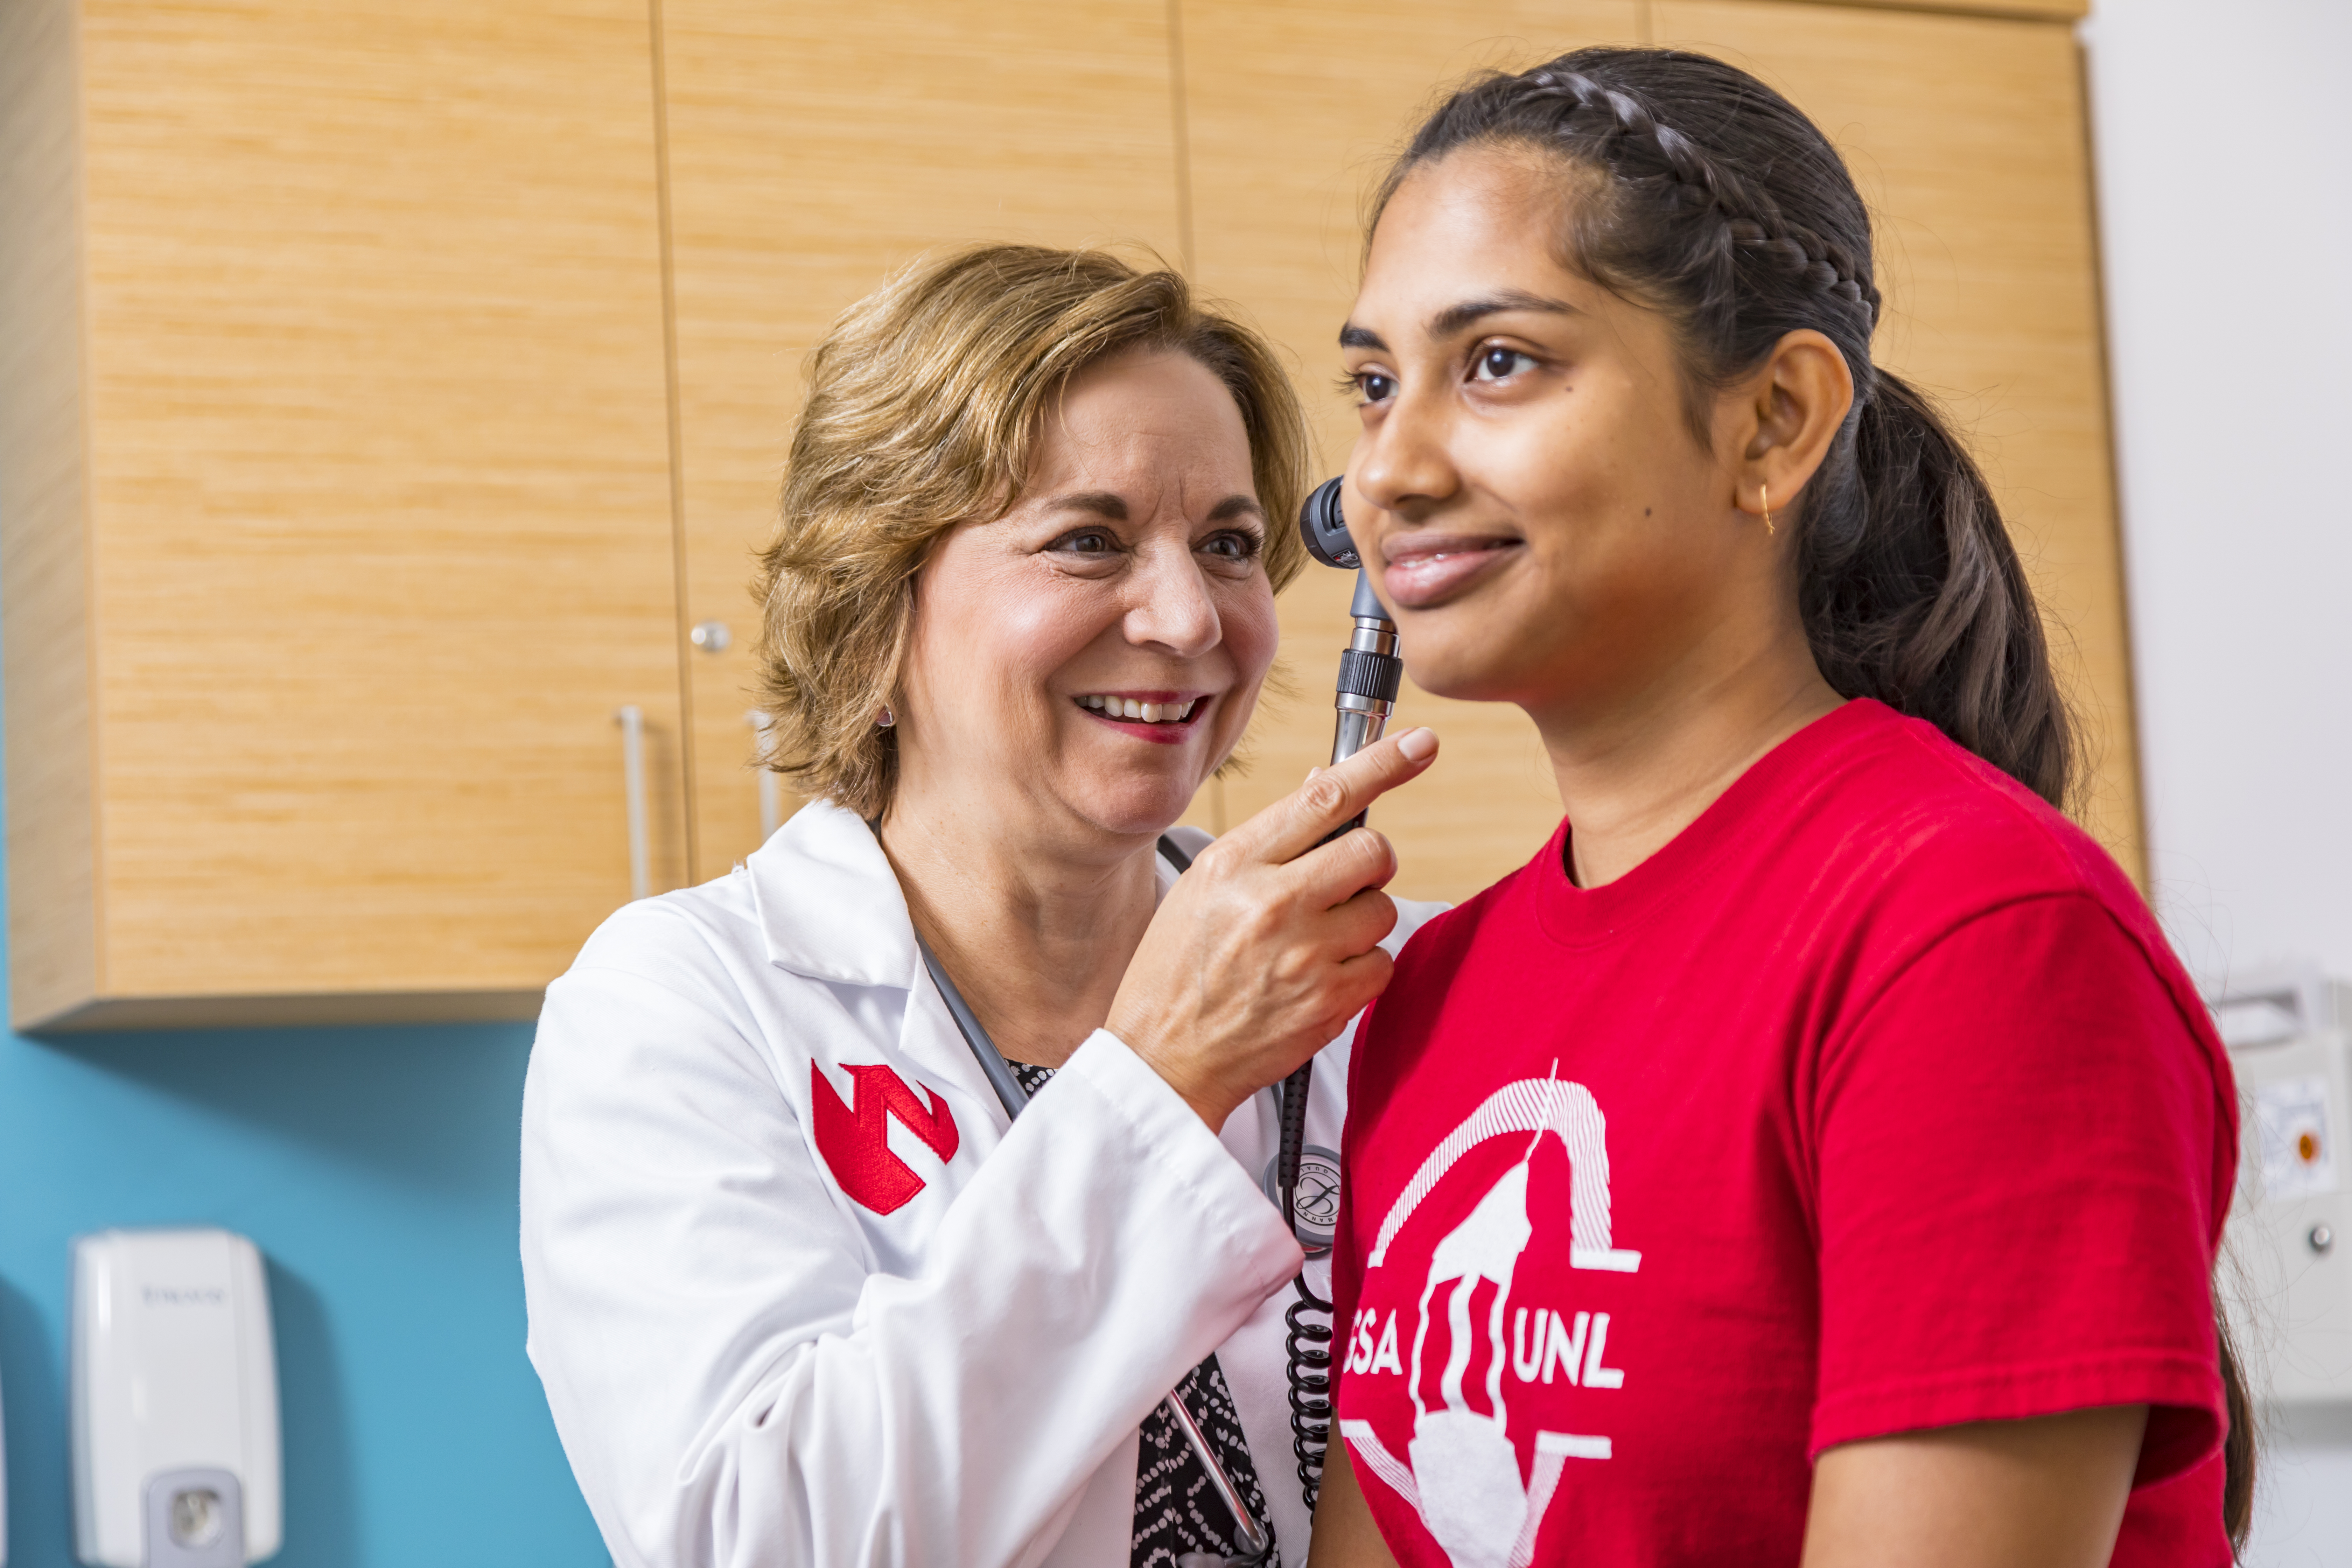 The University Health Center offers annual physicals to students. 